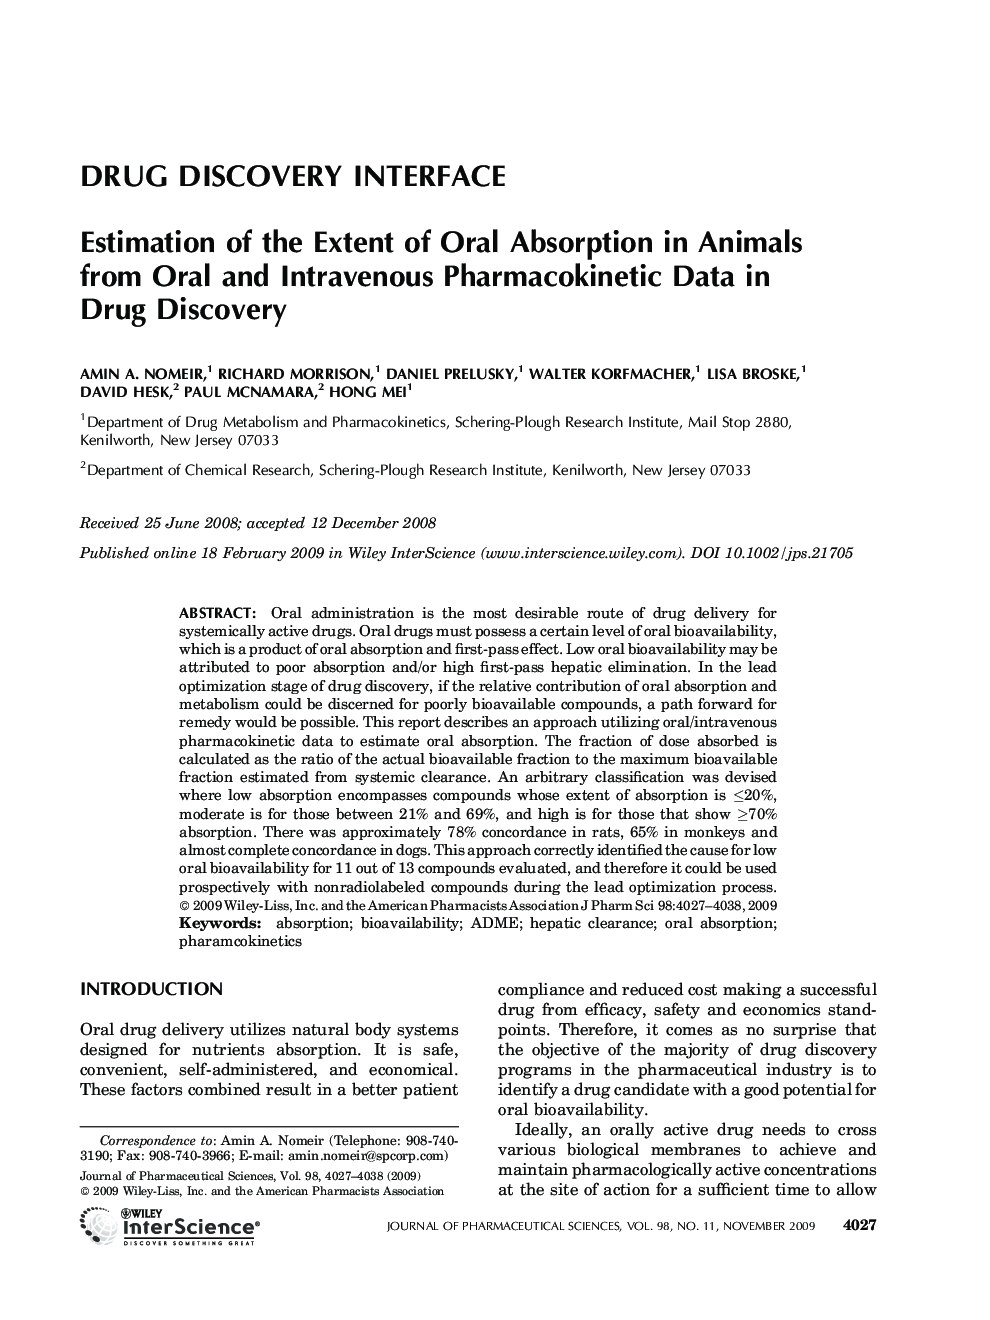 Estimation of the extent of oral absorption in animals from oral and intravenous pharmacokinetic data in drug discovery